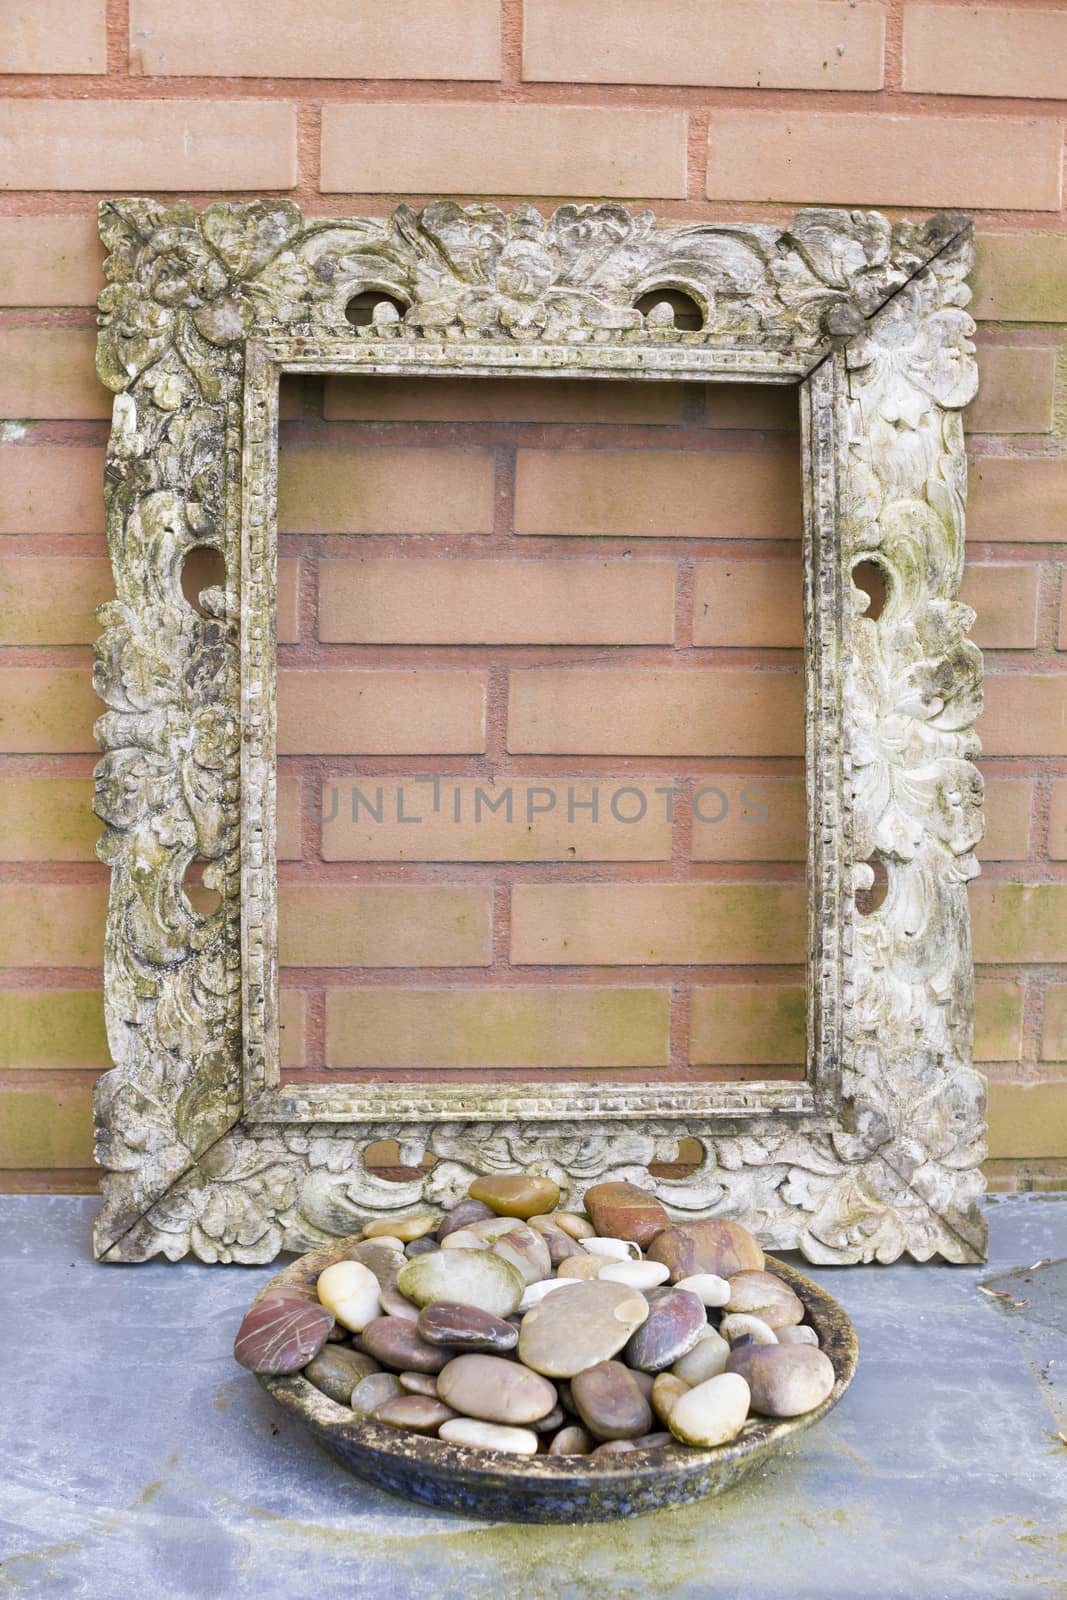 Wooden picture frame against  a brick background